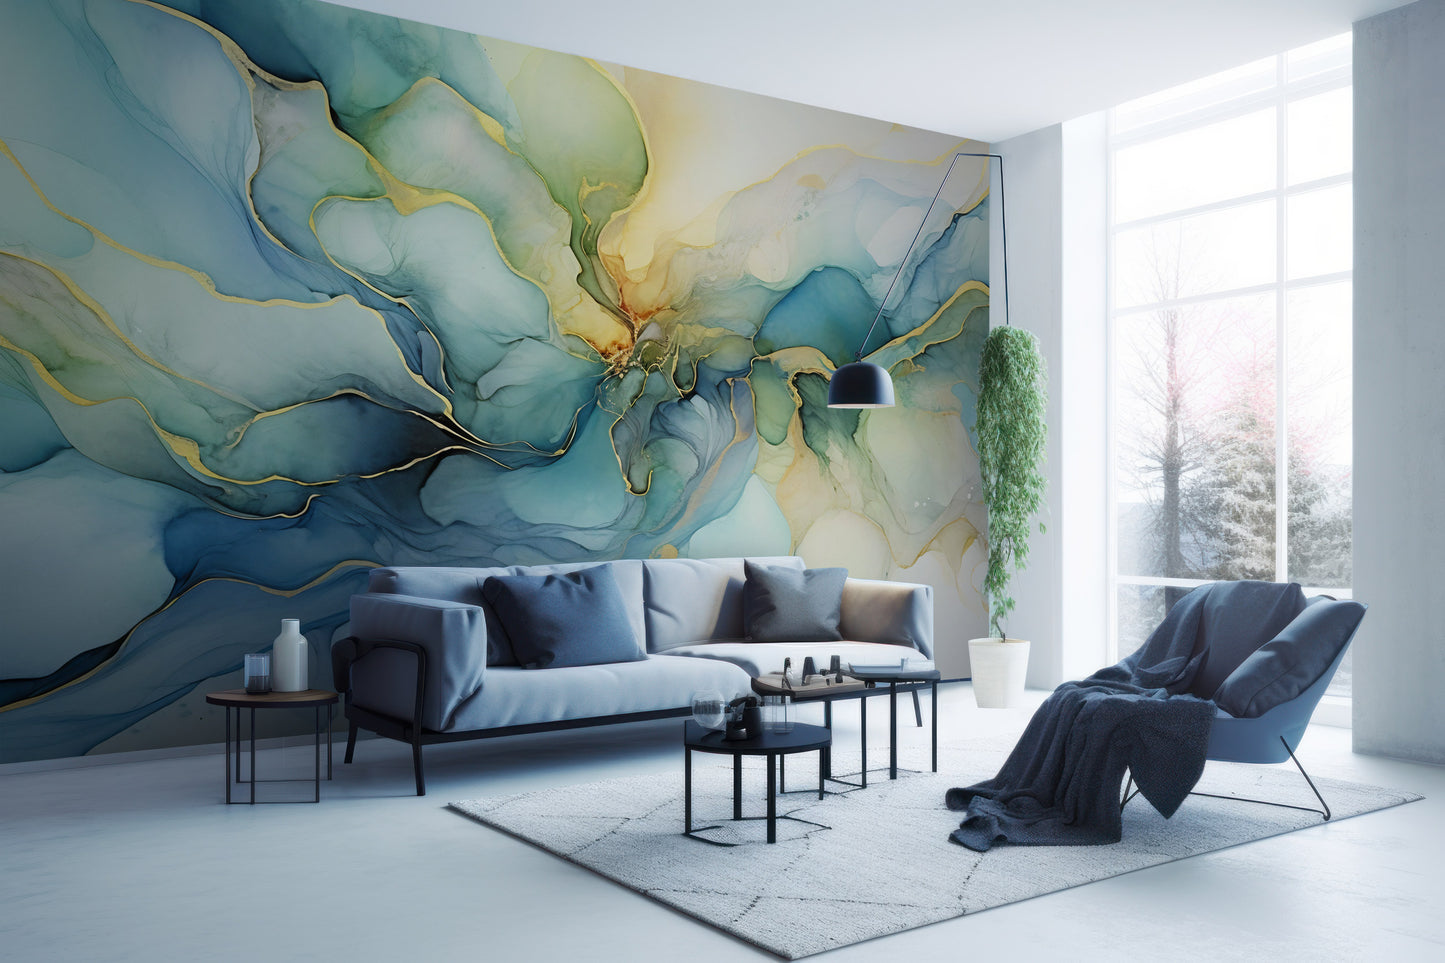 Captivating Blue, Green, and Gold Watercolor Mural